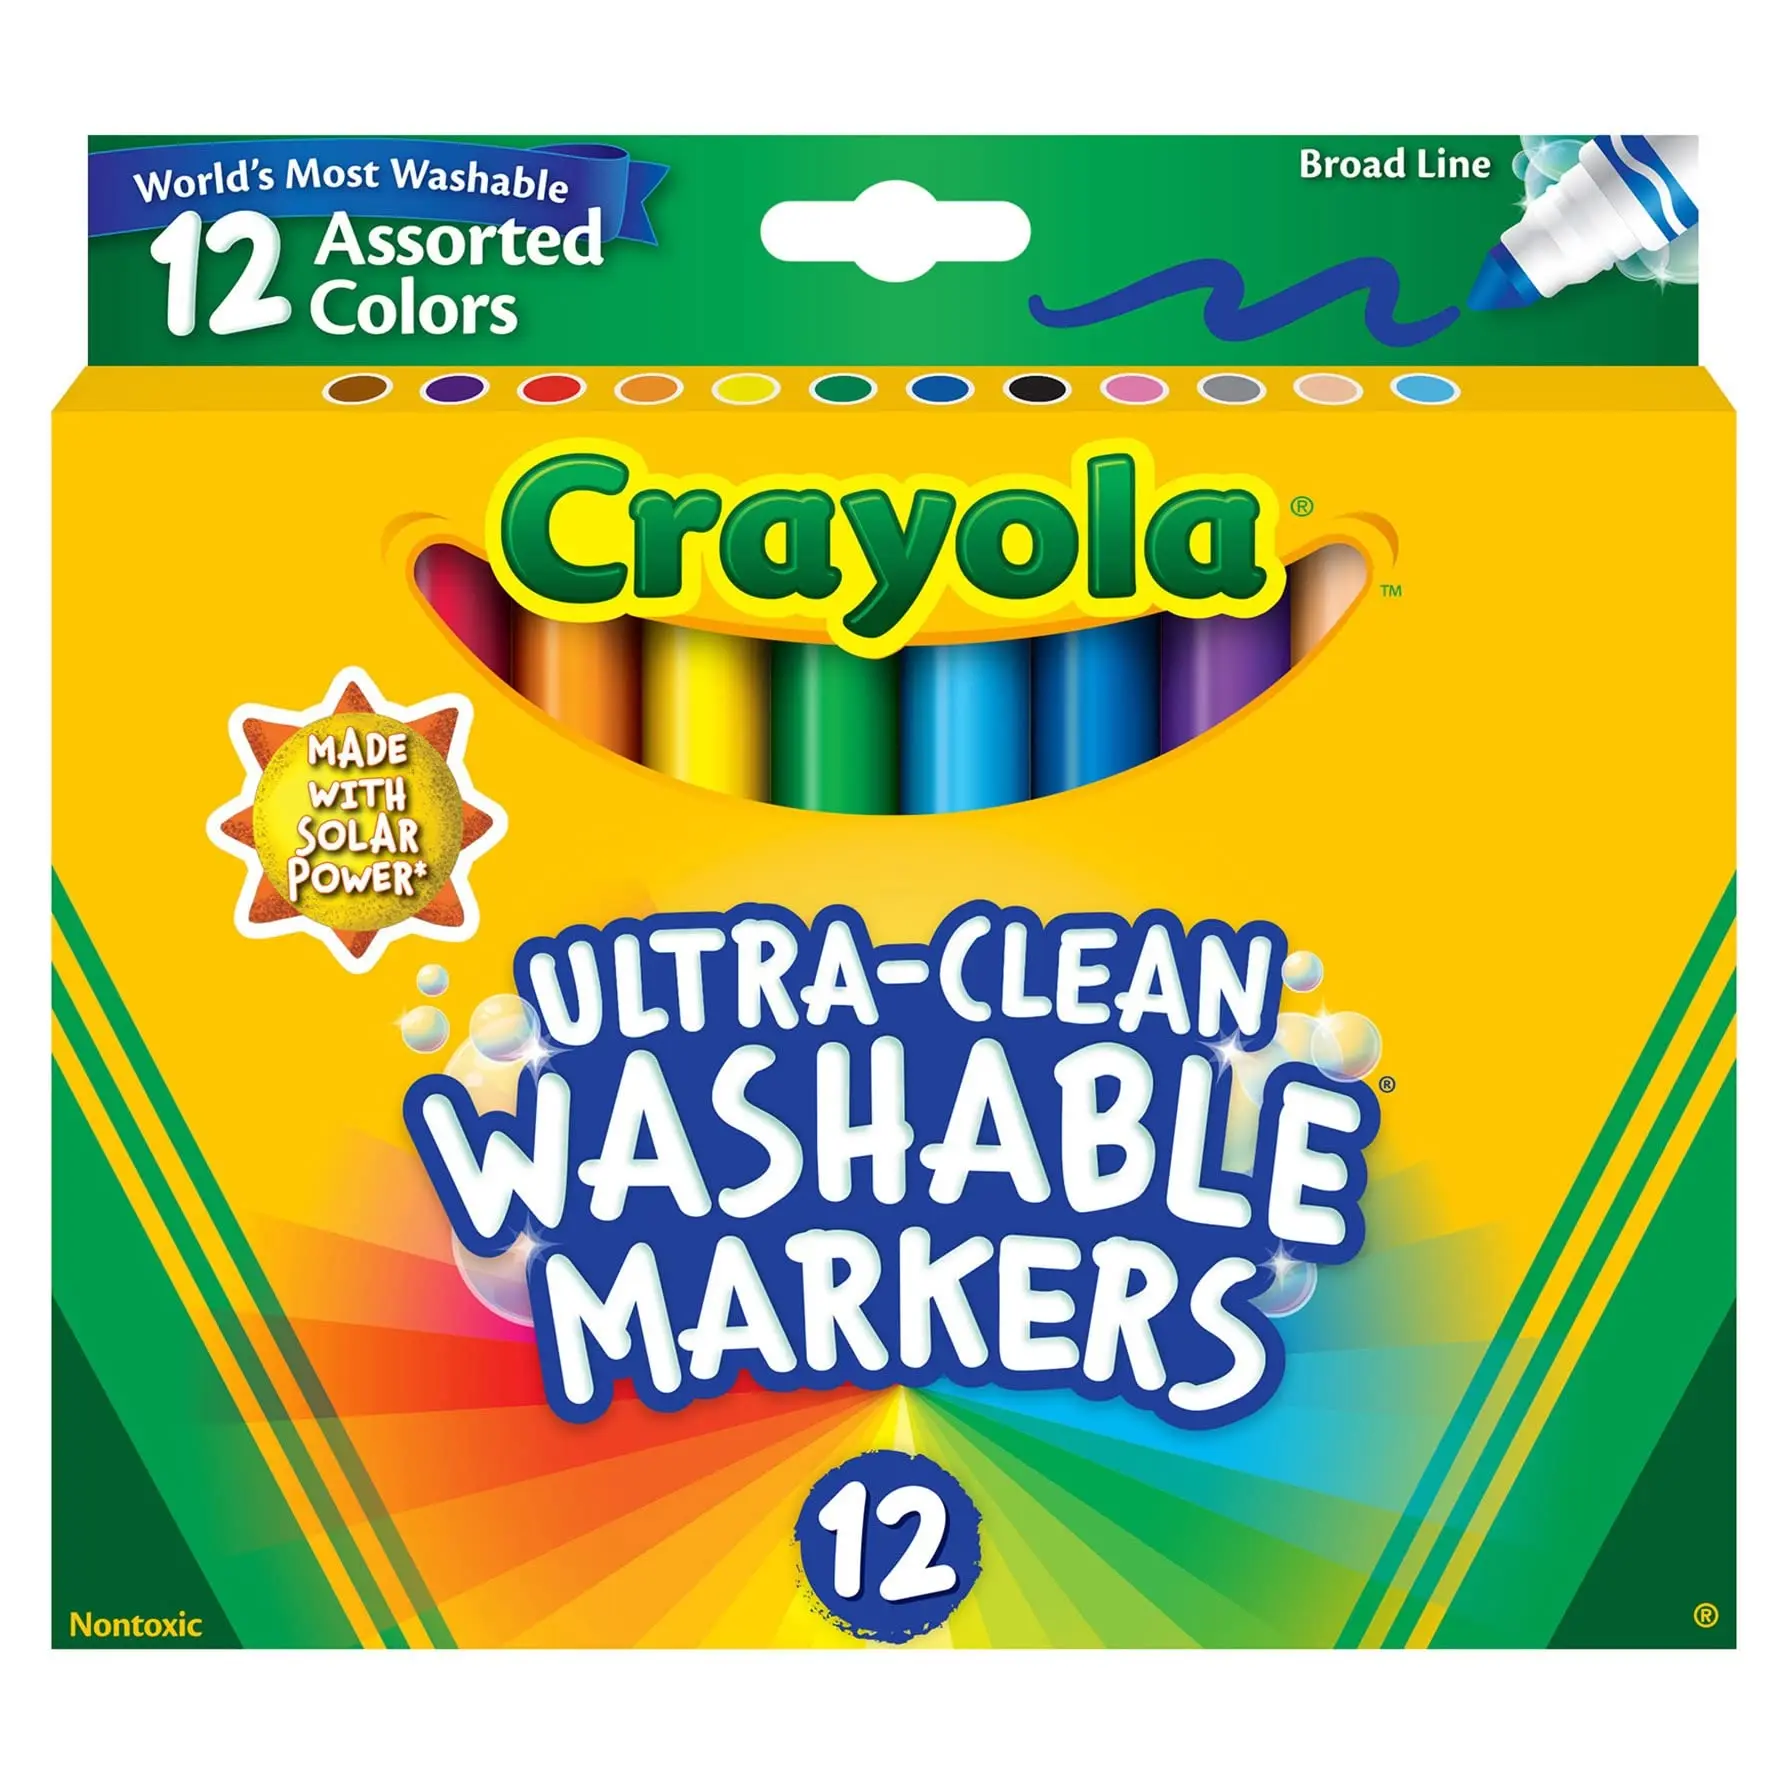 https://ae01.alicdn.com/kf/S6aa076a2c3f443cba66b372f836b4f8eE/Crayola-Ultra-Clean-Washable-Broad-Line-For-Kids-Watercolor-Pens-For-Drawing-Painting-8-12-40.jpg